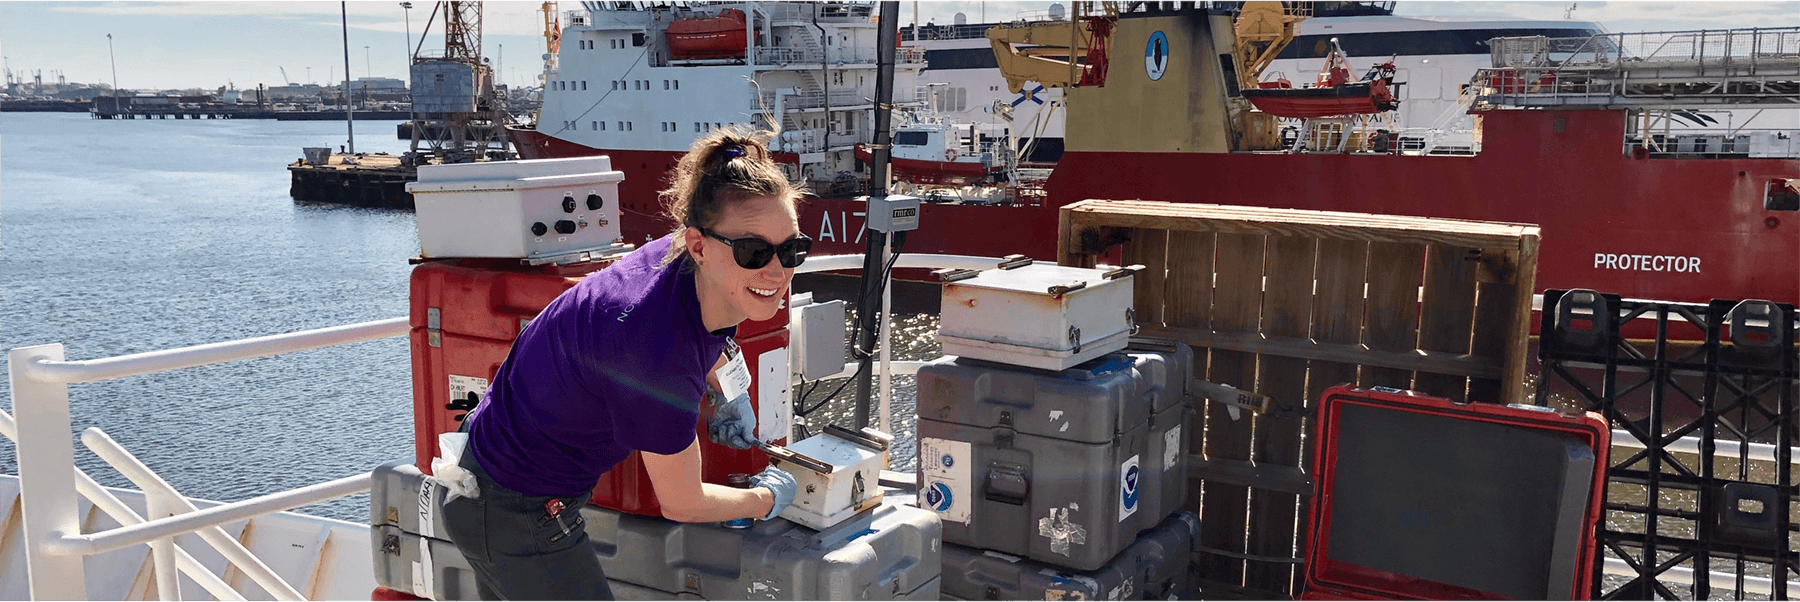 Researcher Elizabeth Thompson installing equipment aboard the NOAA Ship Ronald H. Brown in preparation for ATOMIC. Credit: NOAA